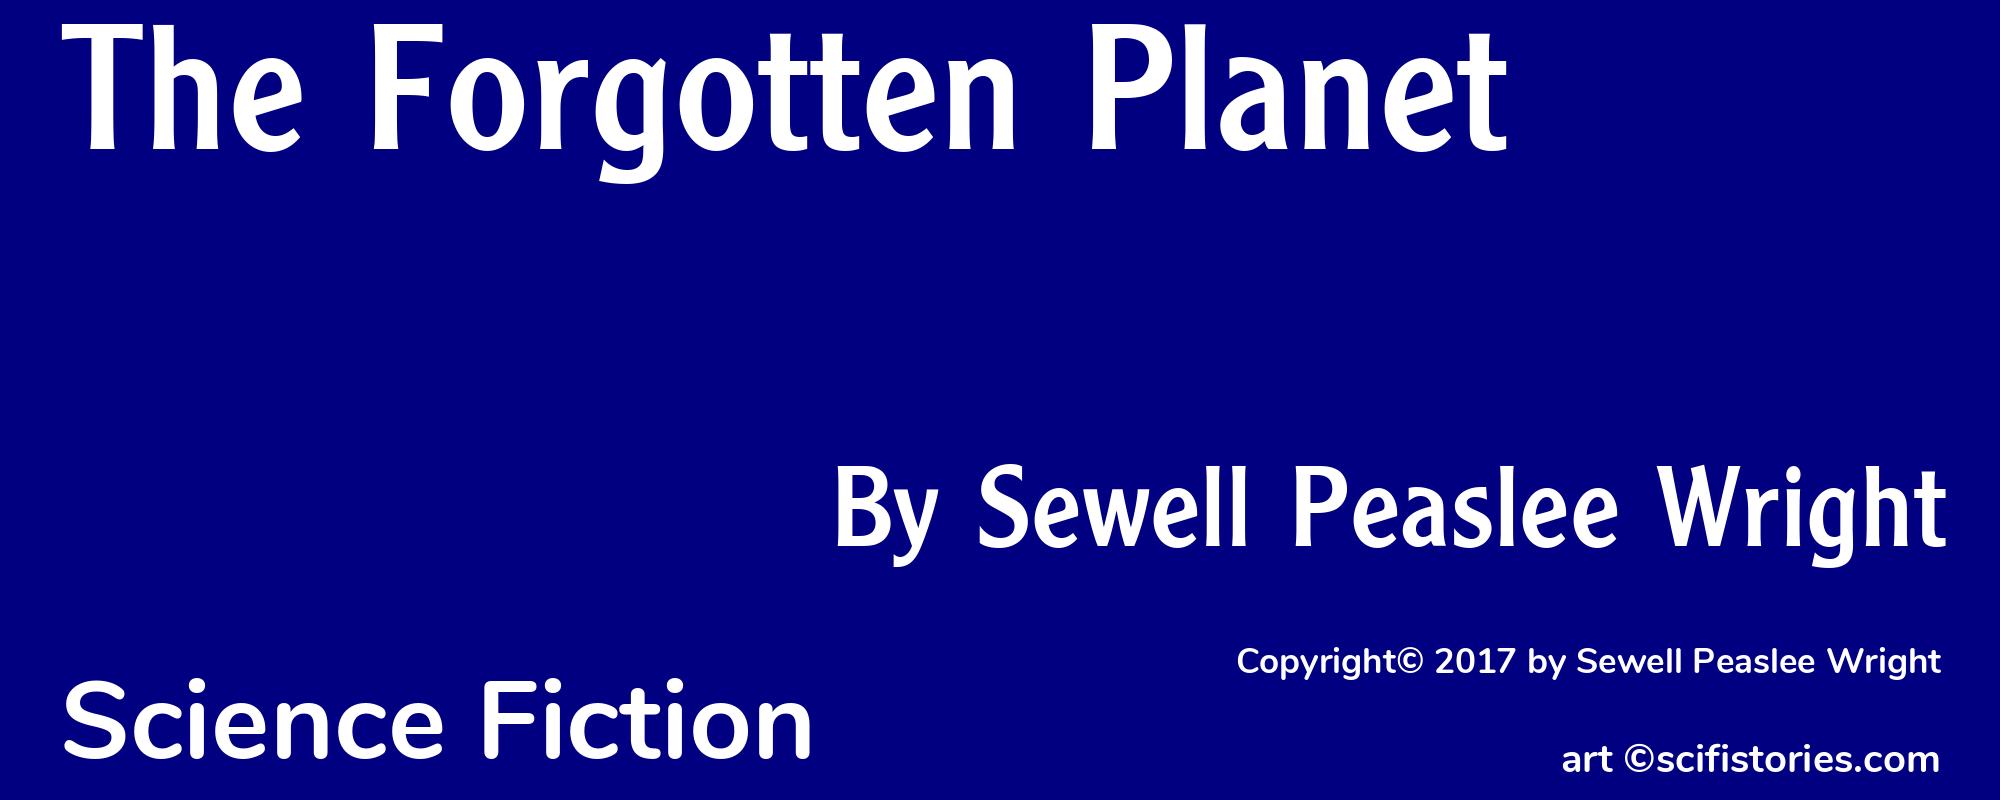 The Forgotten Planet - Cover